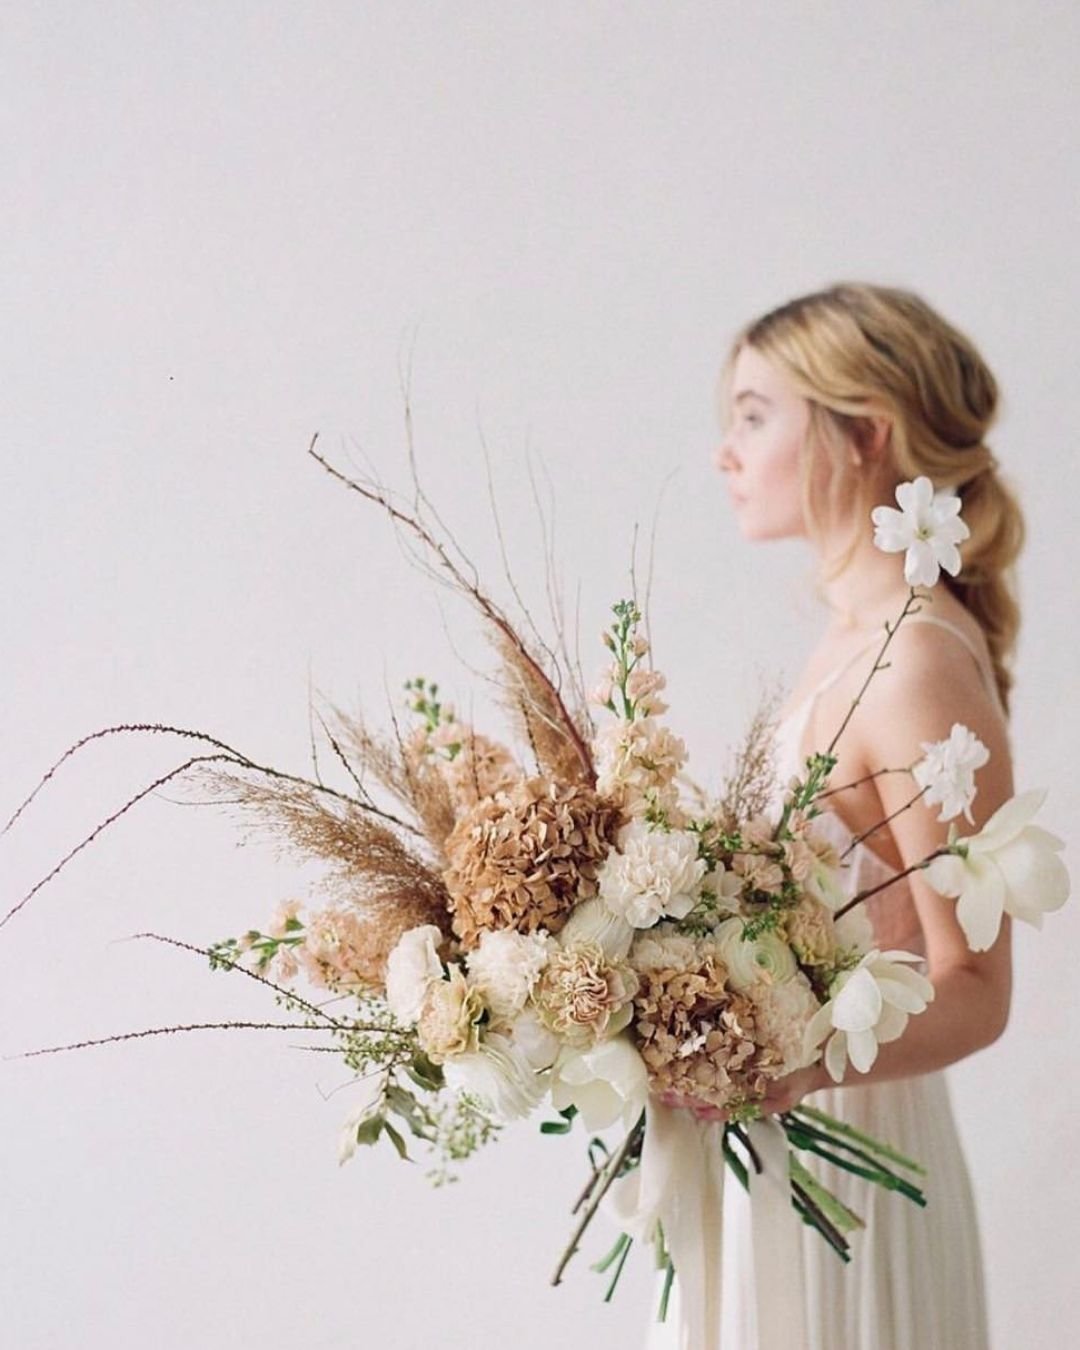 how to preserve wedding bouquet with wild flowers